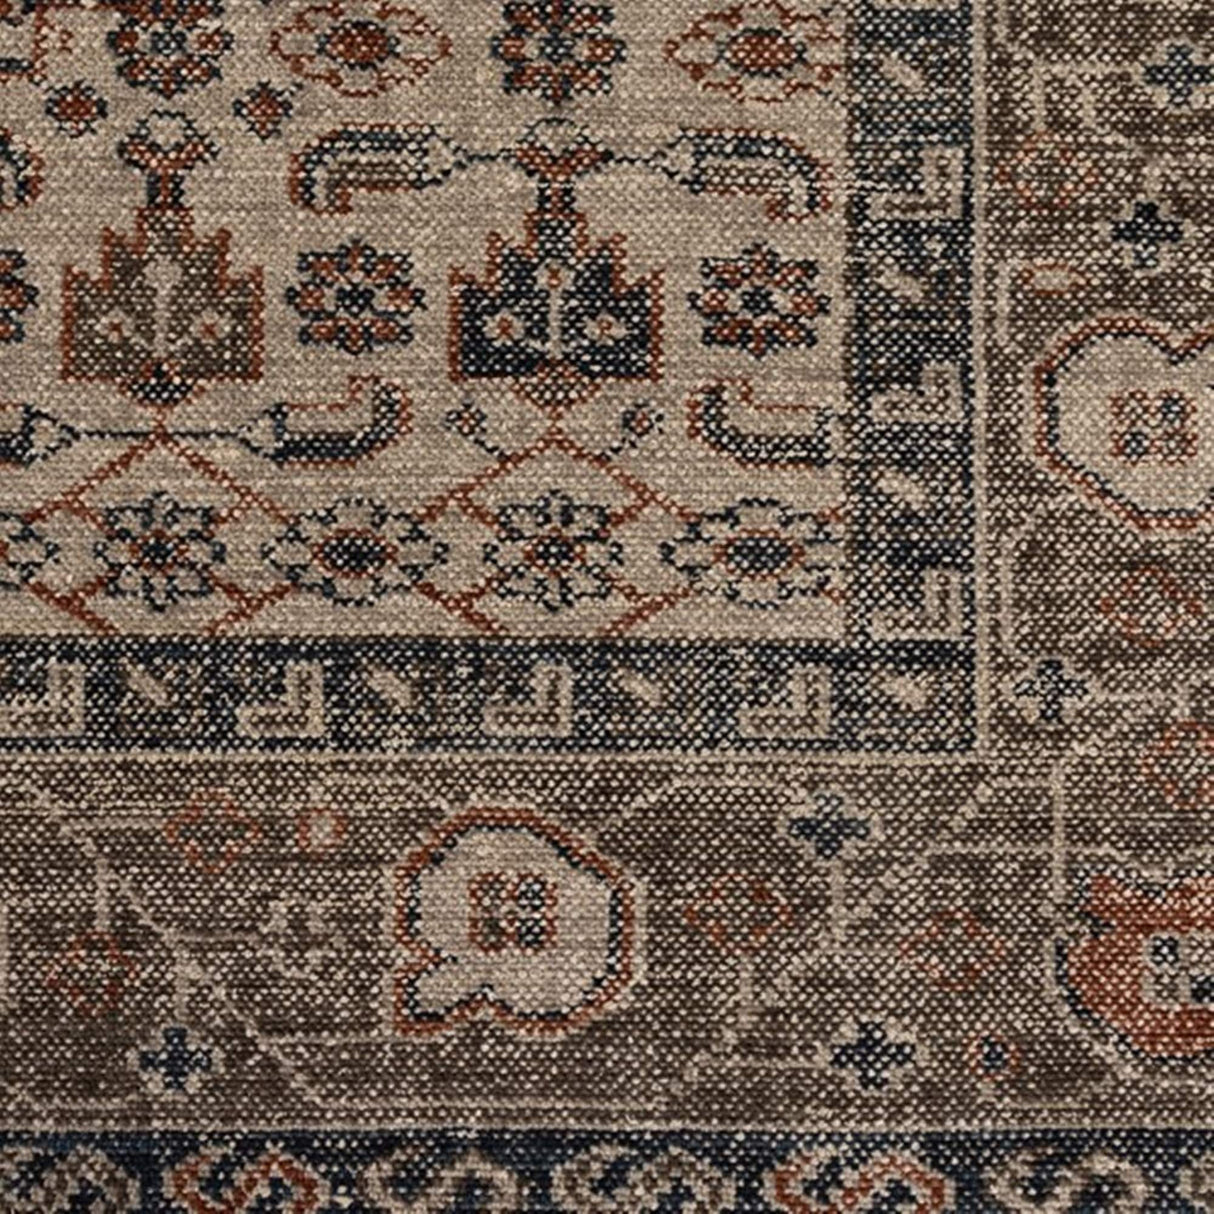 Four Hands Prato Rug Hand-Knotted Rug